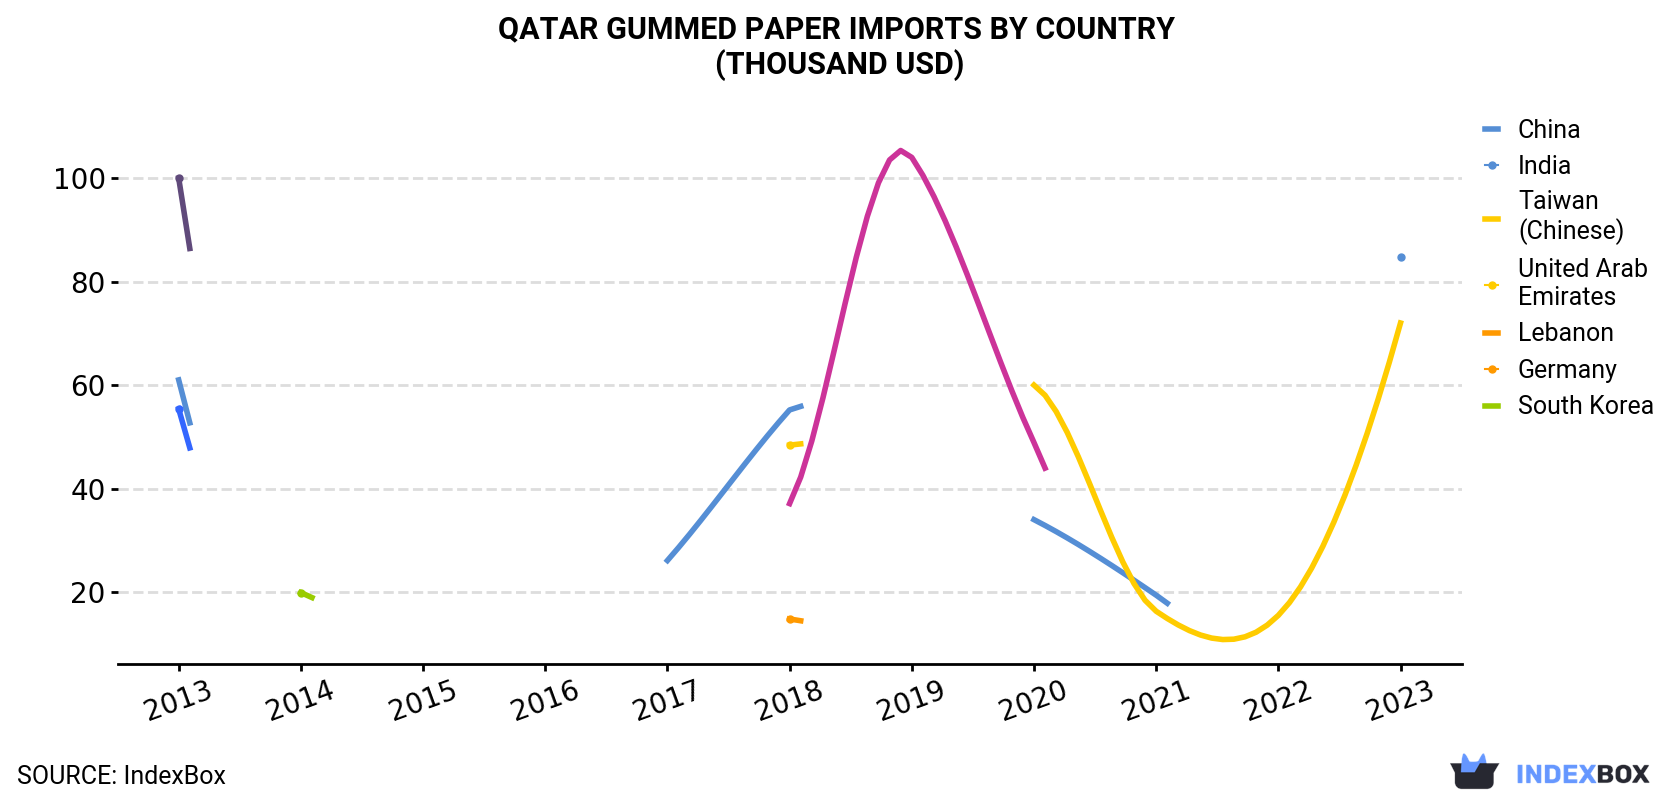 Qatar Gummed Paper Imports By Country (Thousand USD)